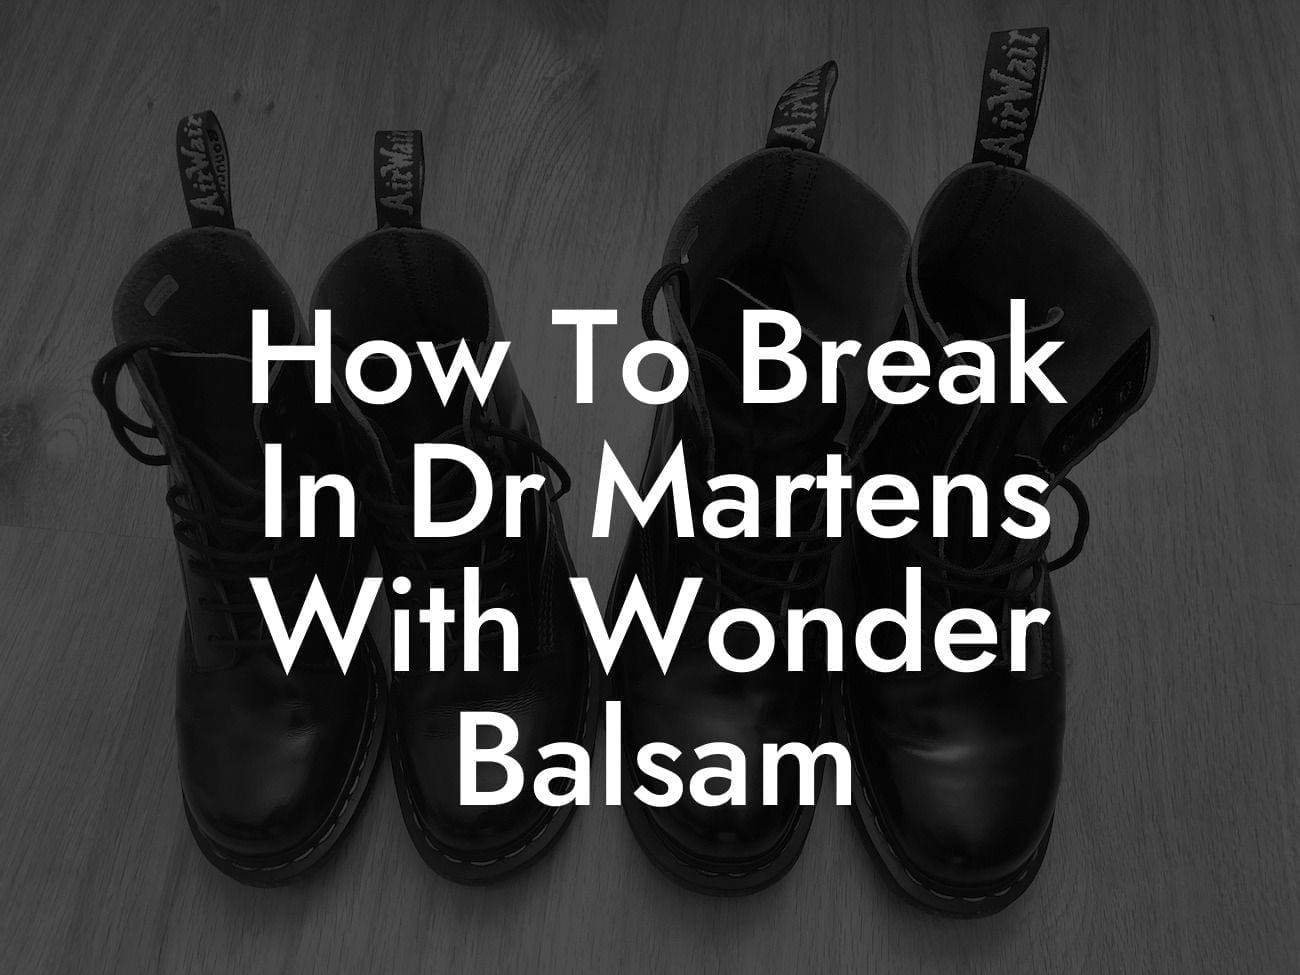 How To Break In Dr Martens With Wonder Balsam